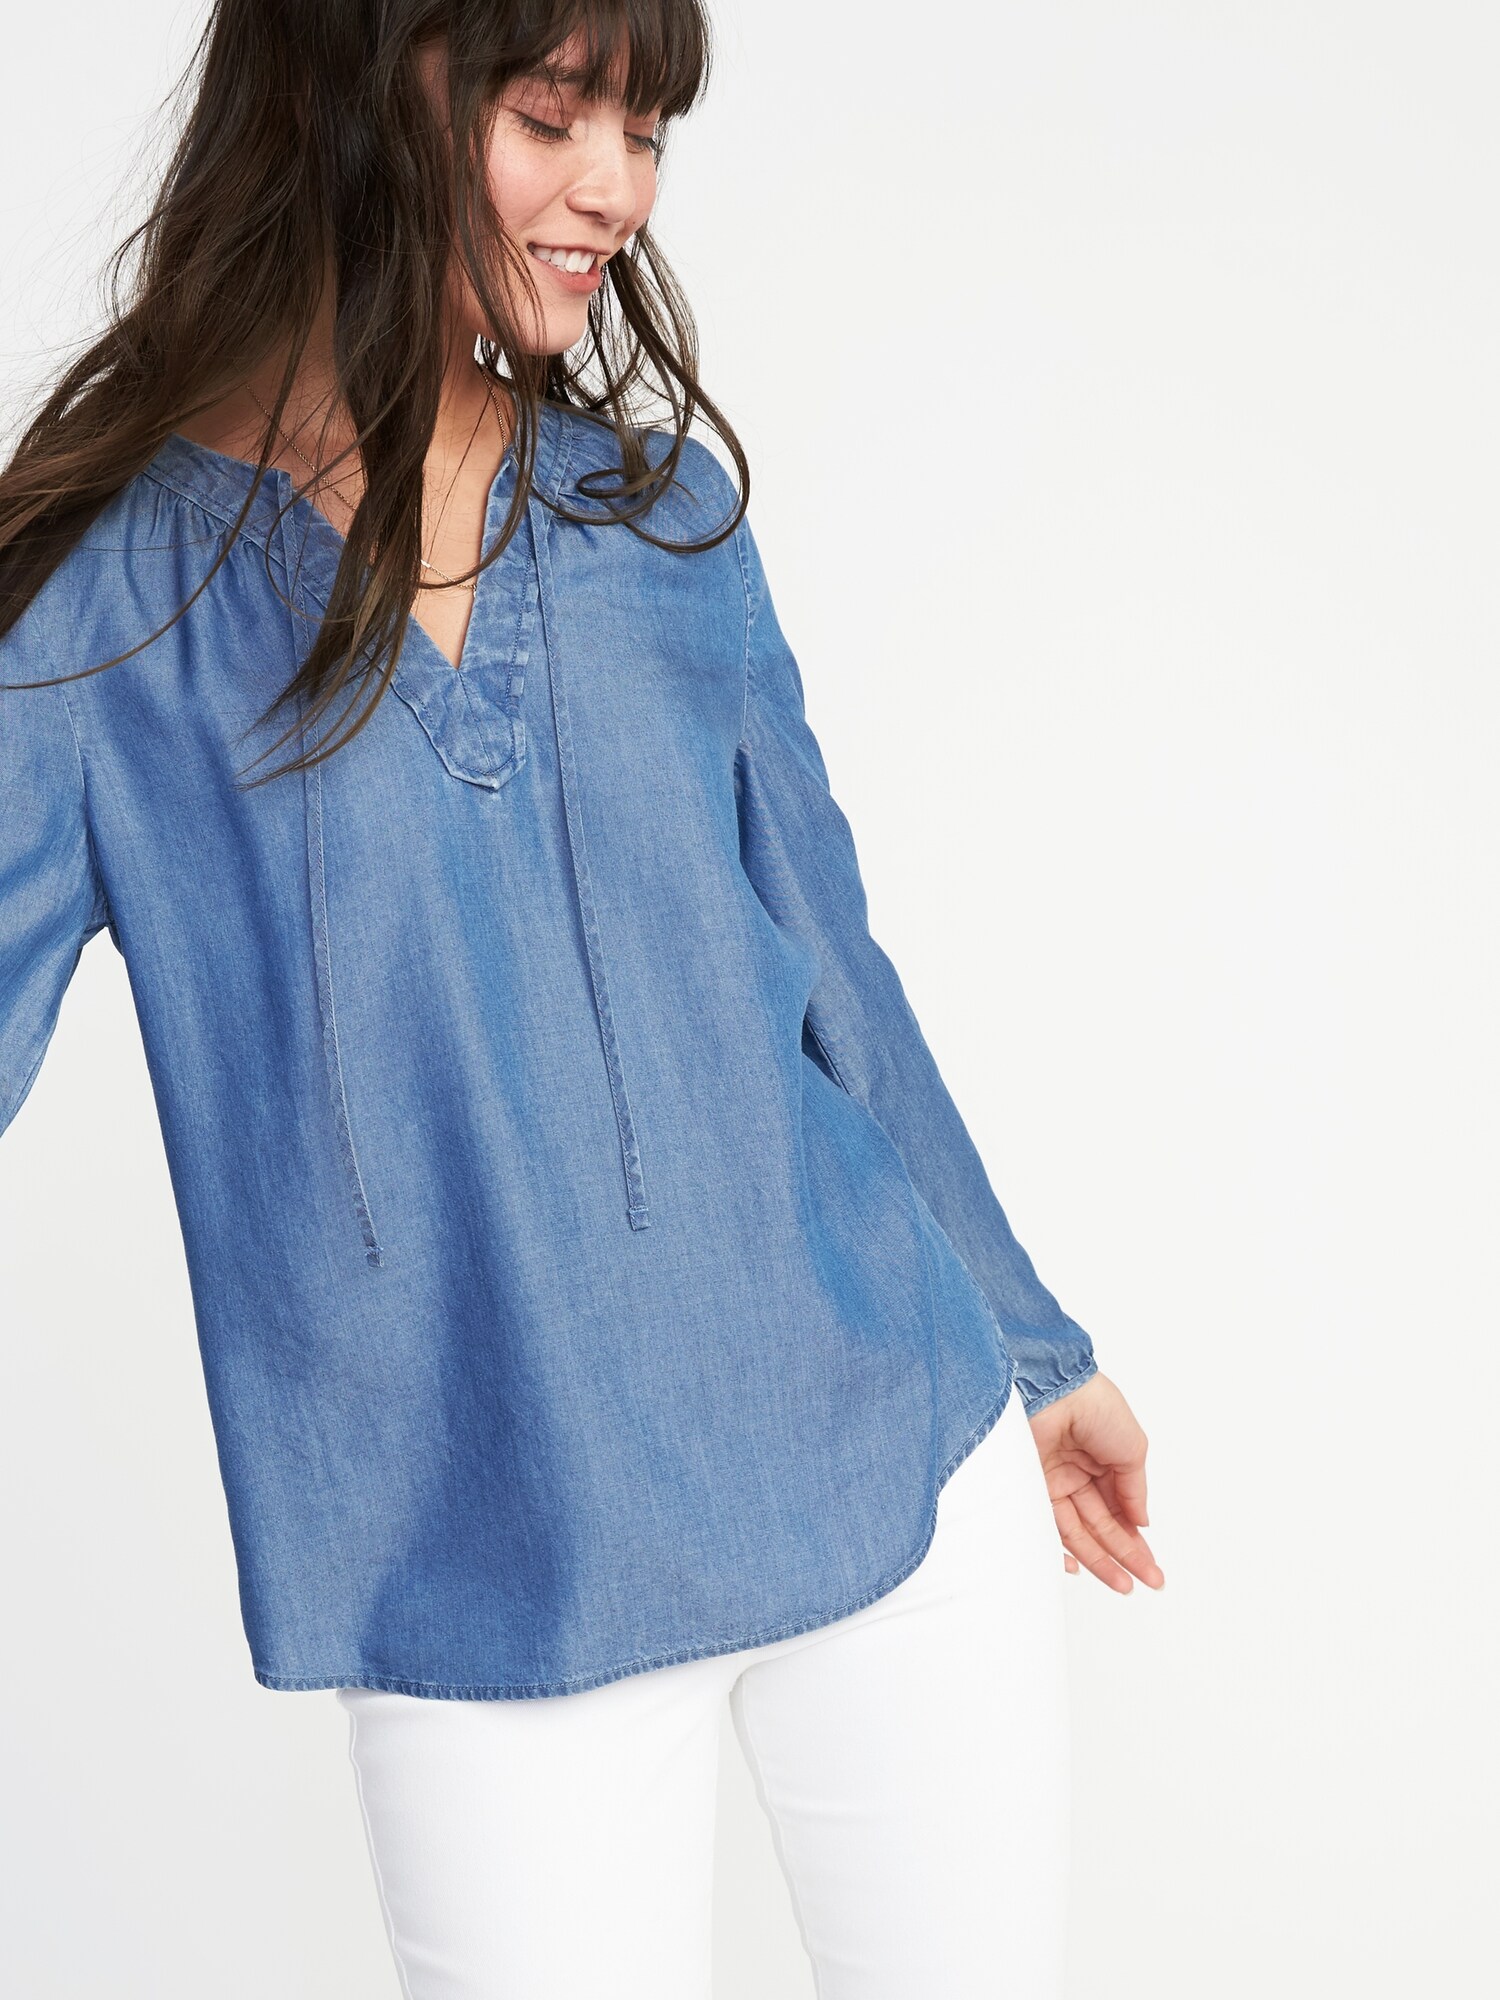 Relaxed Tie-Neck Tencel® Top for Women | Old Navy